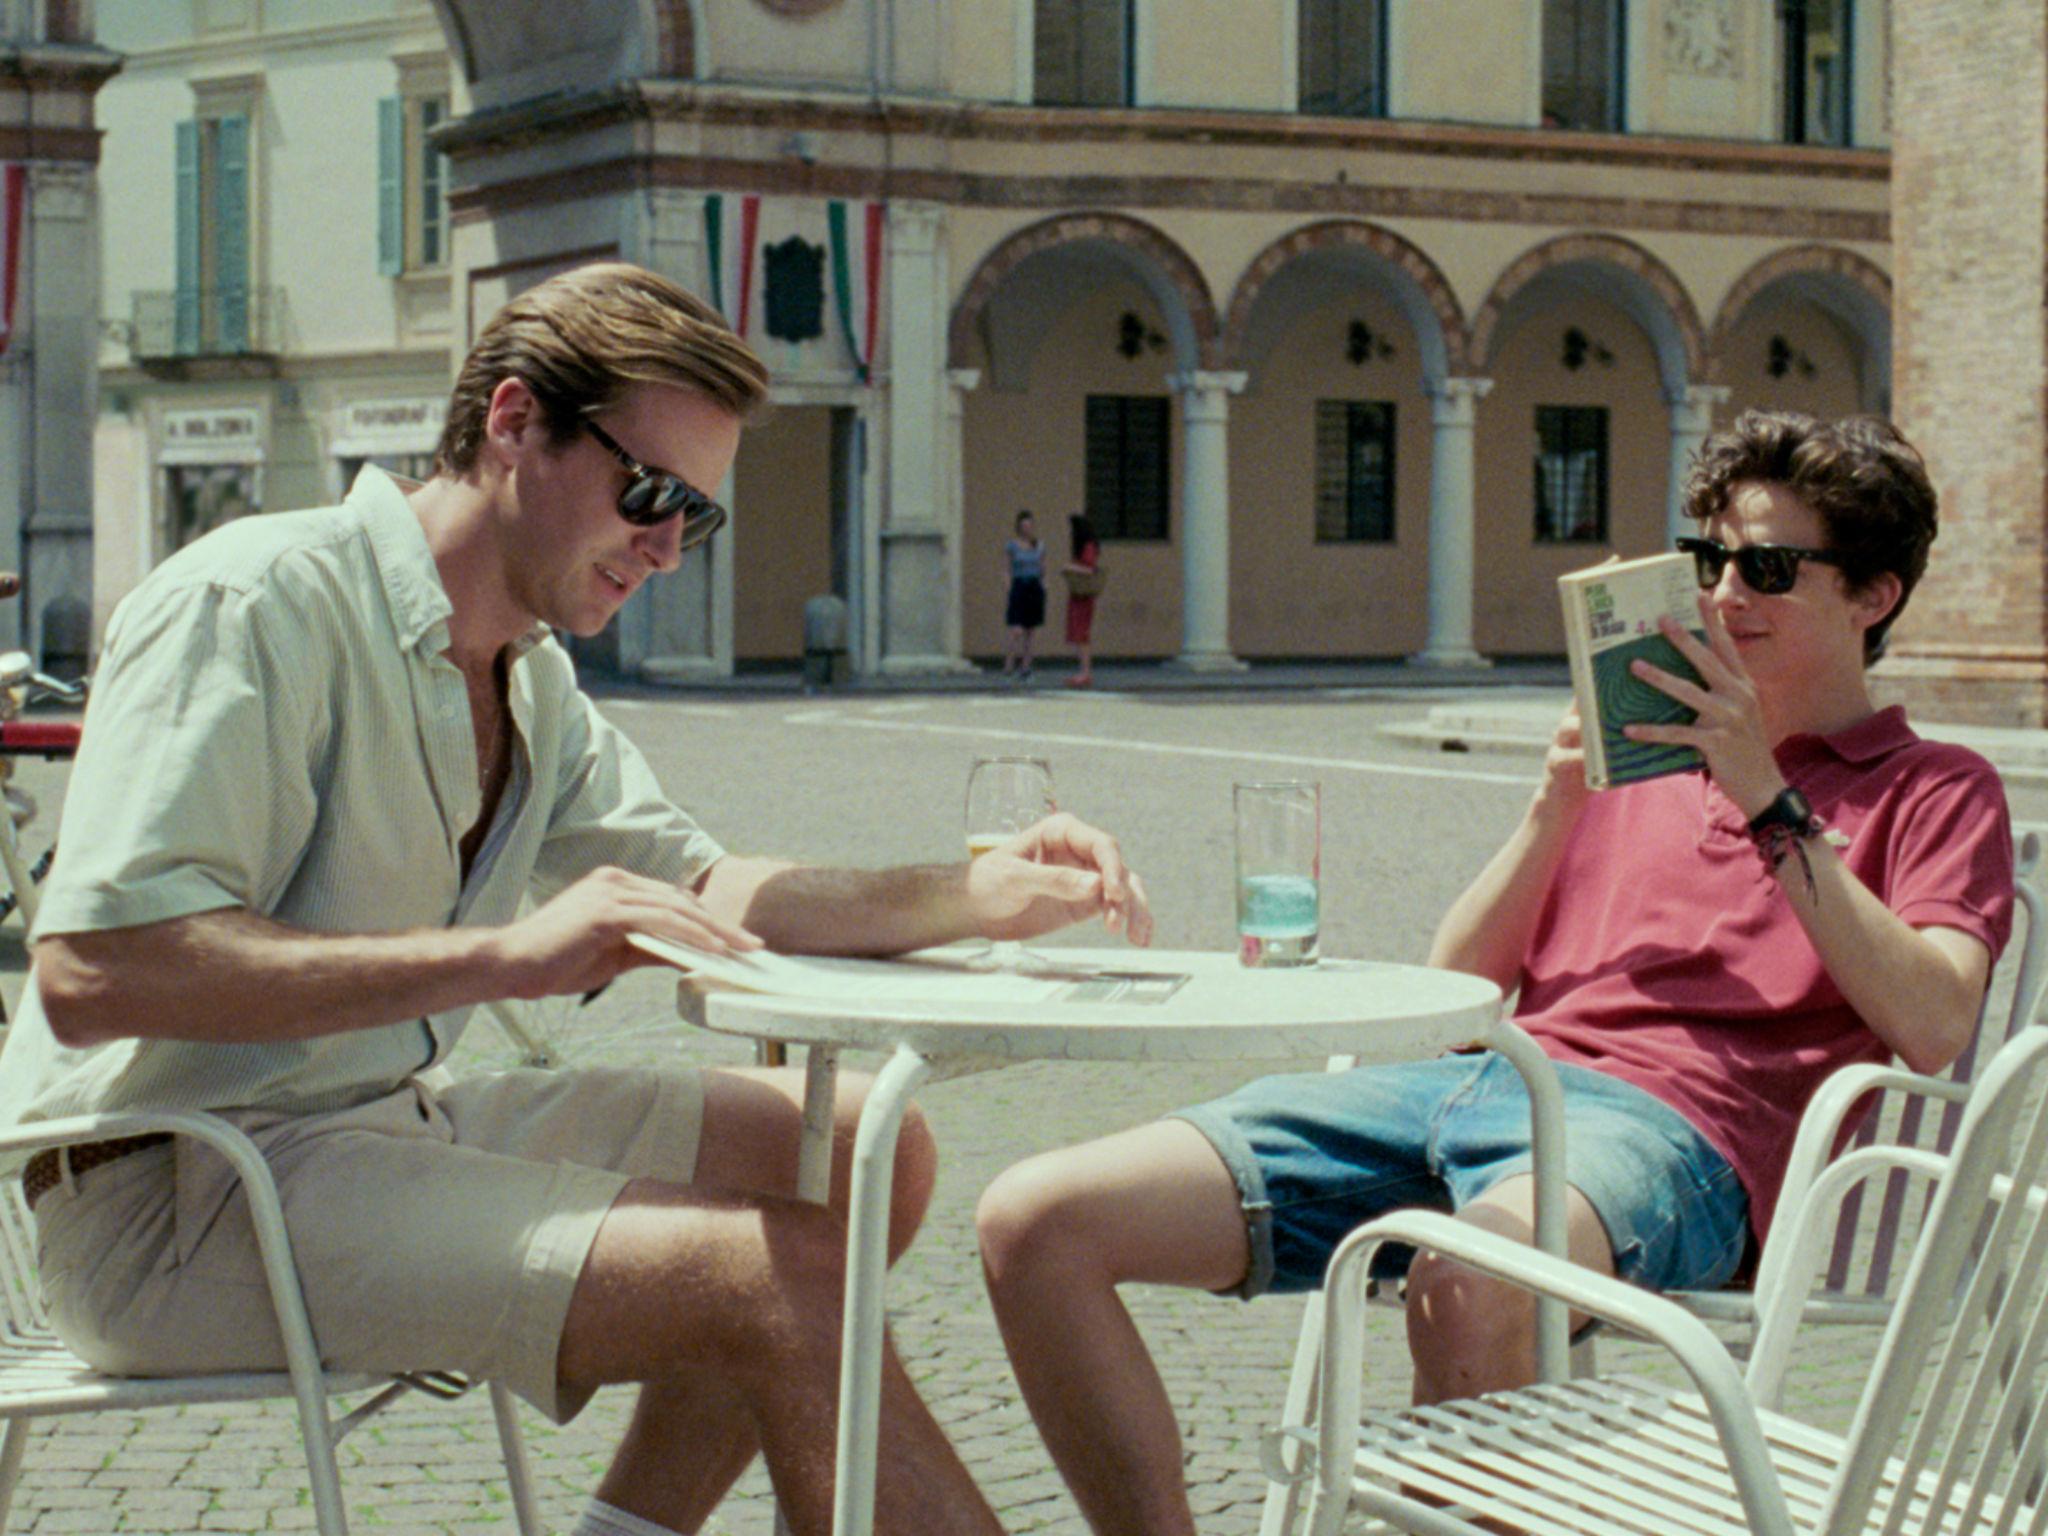 Armie Hammer and Timothee Chalamet in ‘Call Me By Your Name’, for which Ivory won an Academy Award for best adapted screenplay – the oldest winner of an Oscar